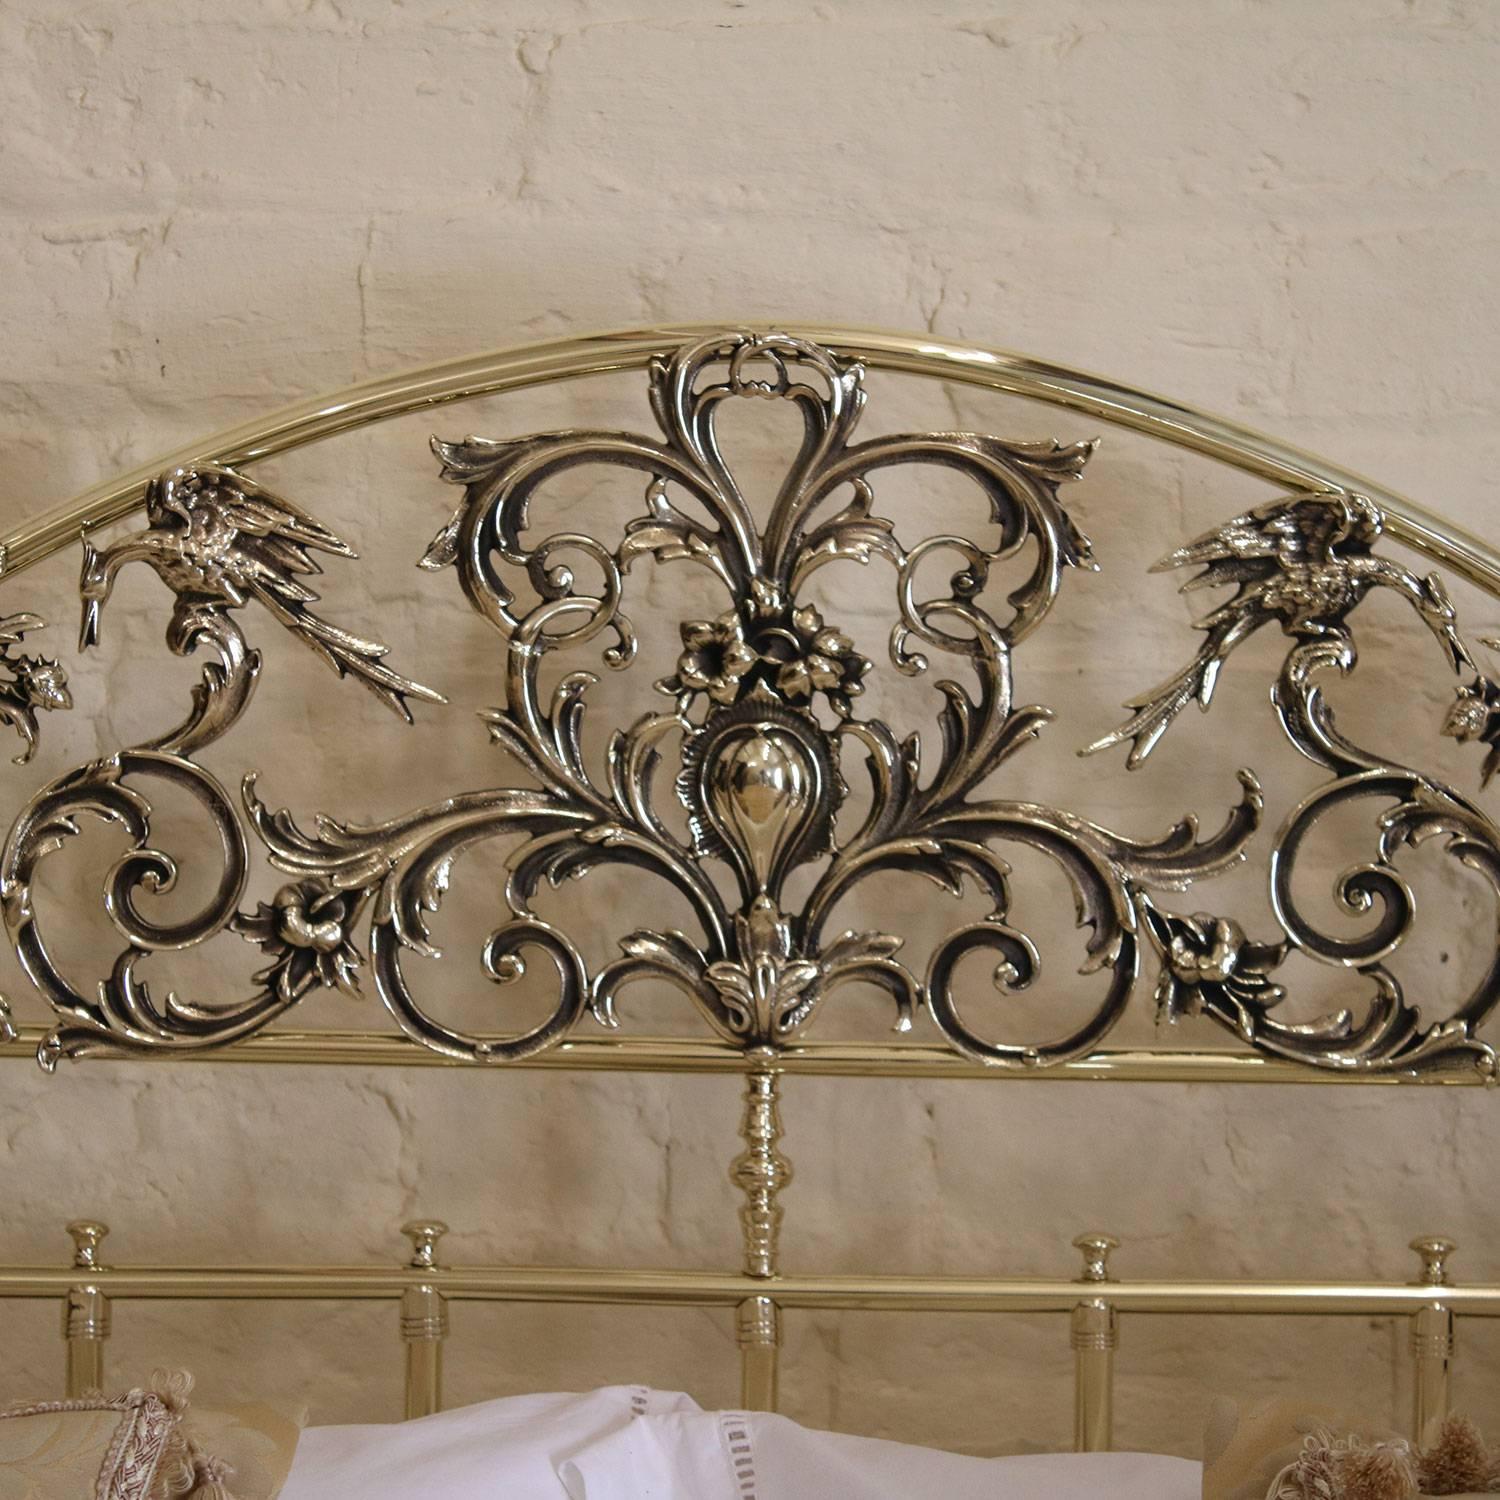 19th Century Antique Brass Four Poster Bed